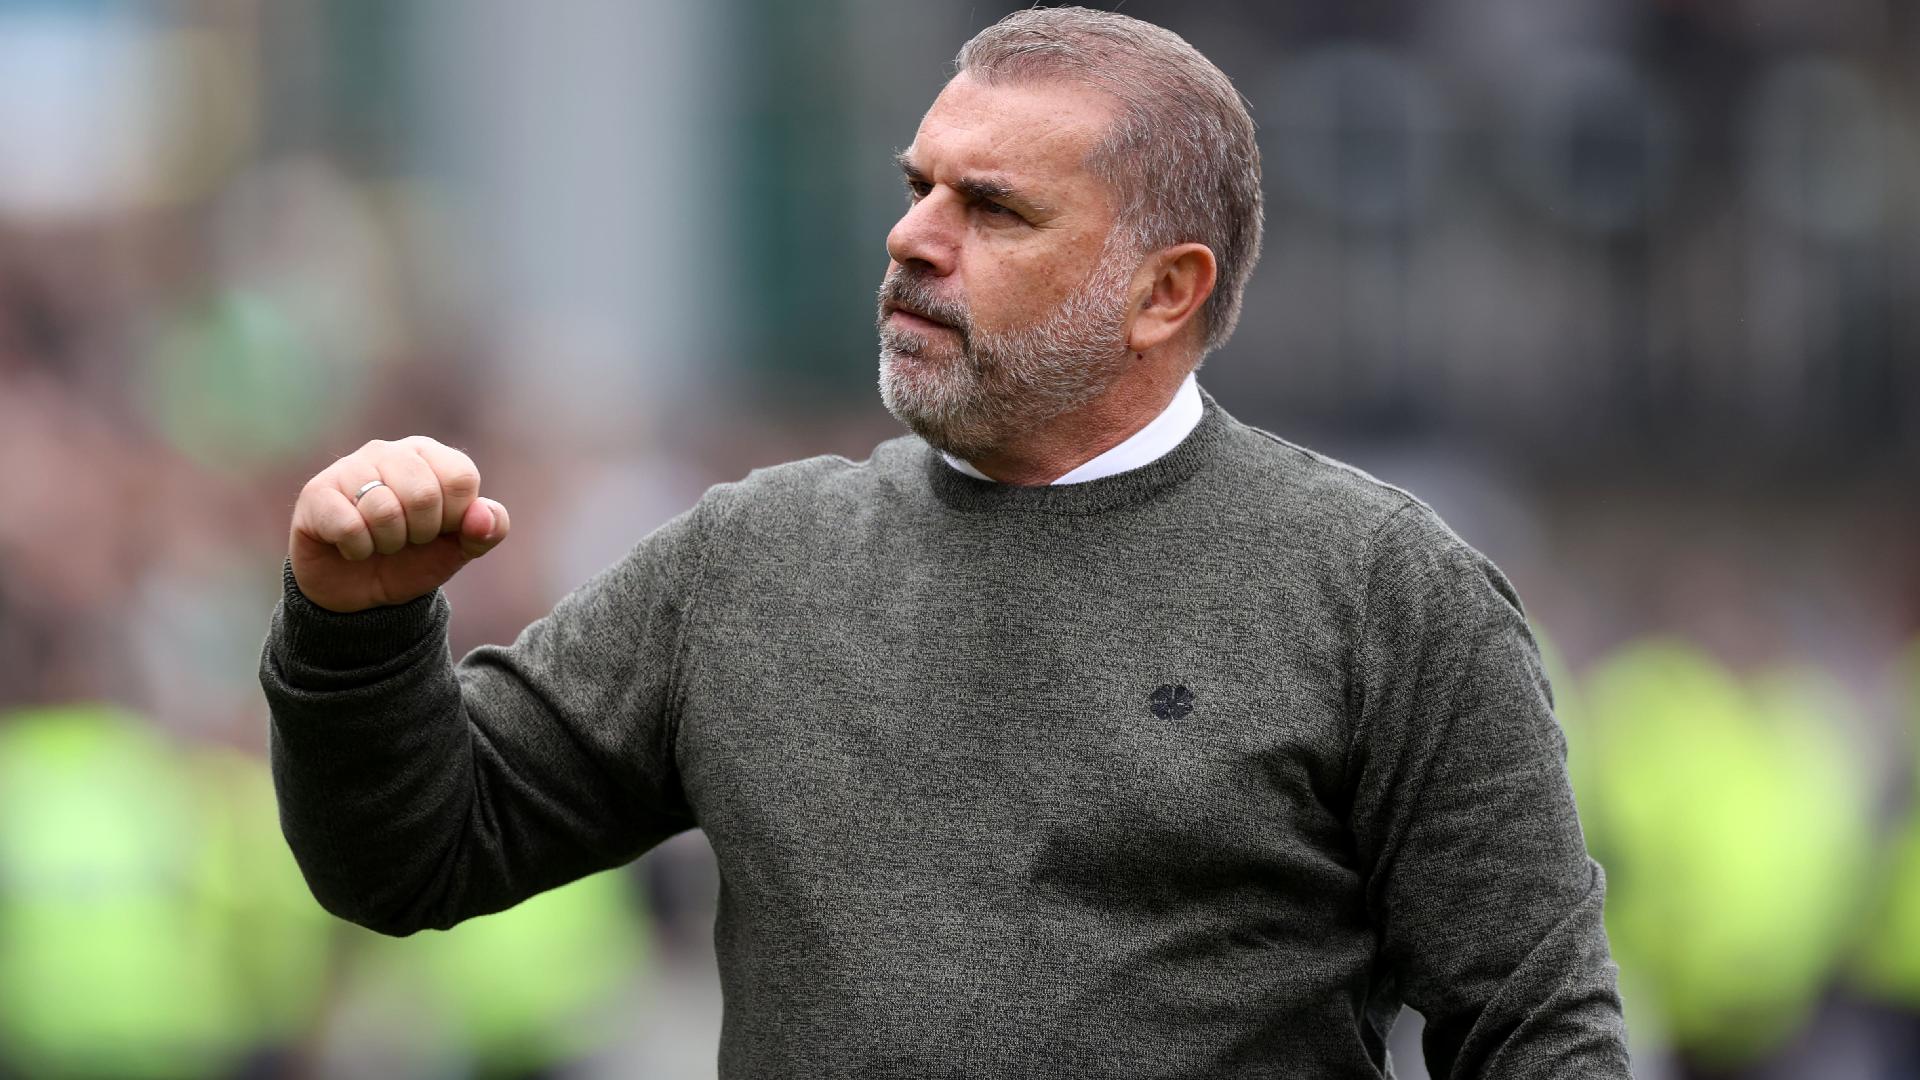 Tottenham boss Ange Postecoglou says ideas like the Super League generally come from people who are "detached" from football (Steve Welsh/PA Wire)